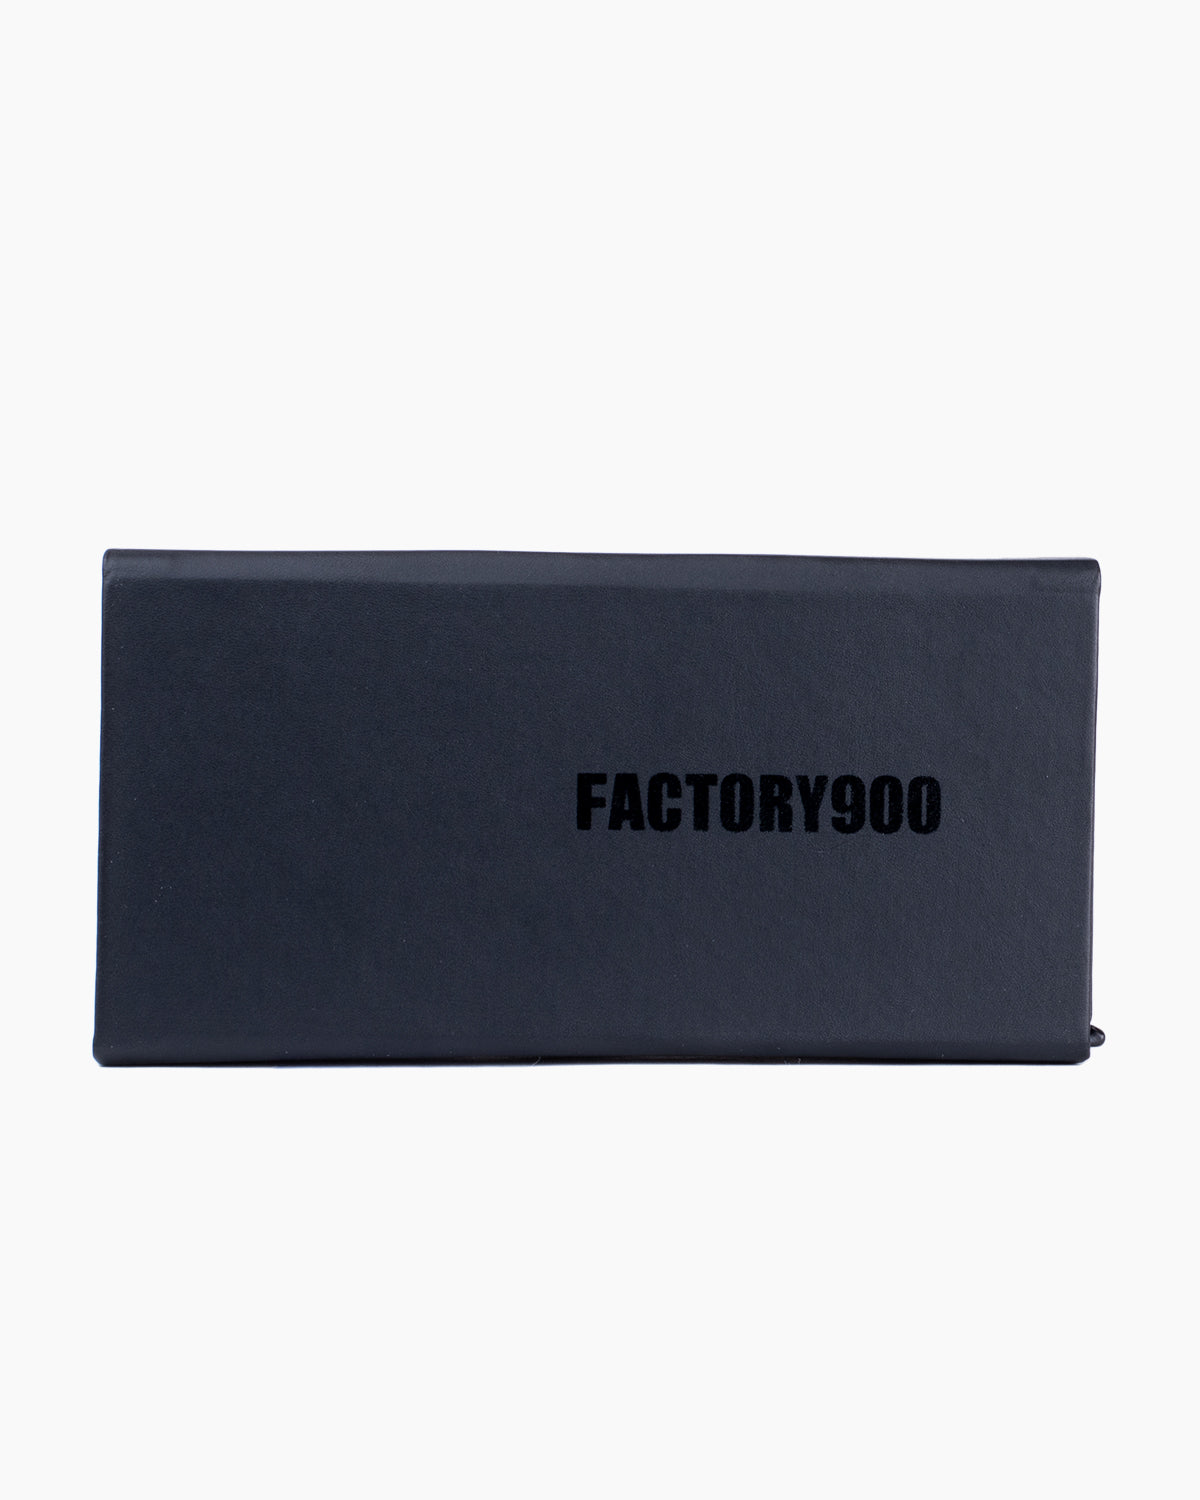 Factory 900 - MF001 - 02 | glasses bar:  Marie-Sophie Dion